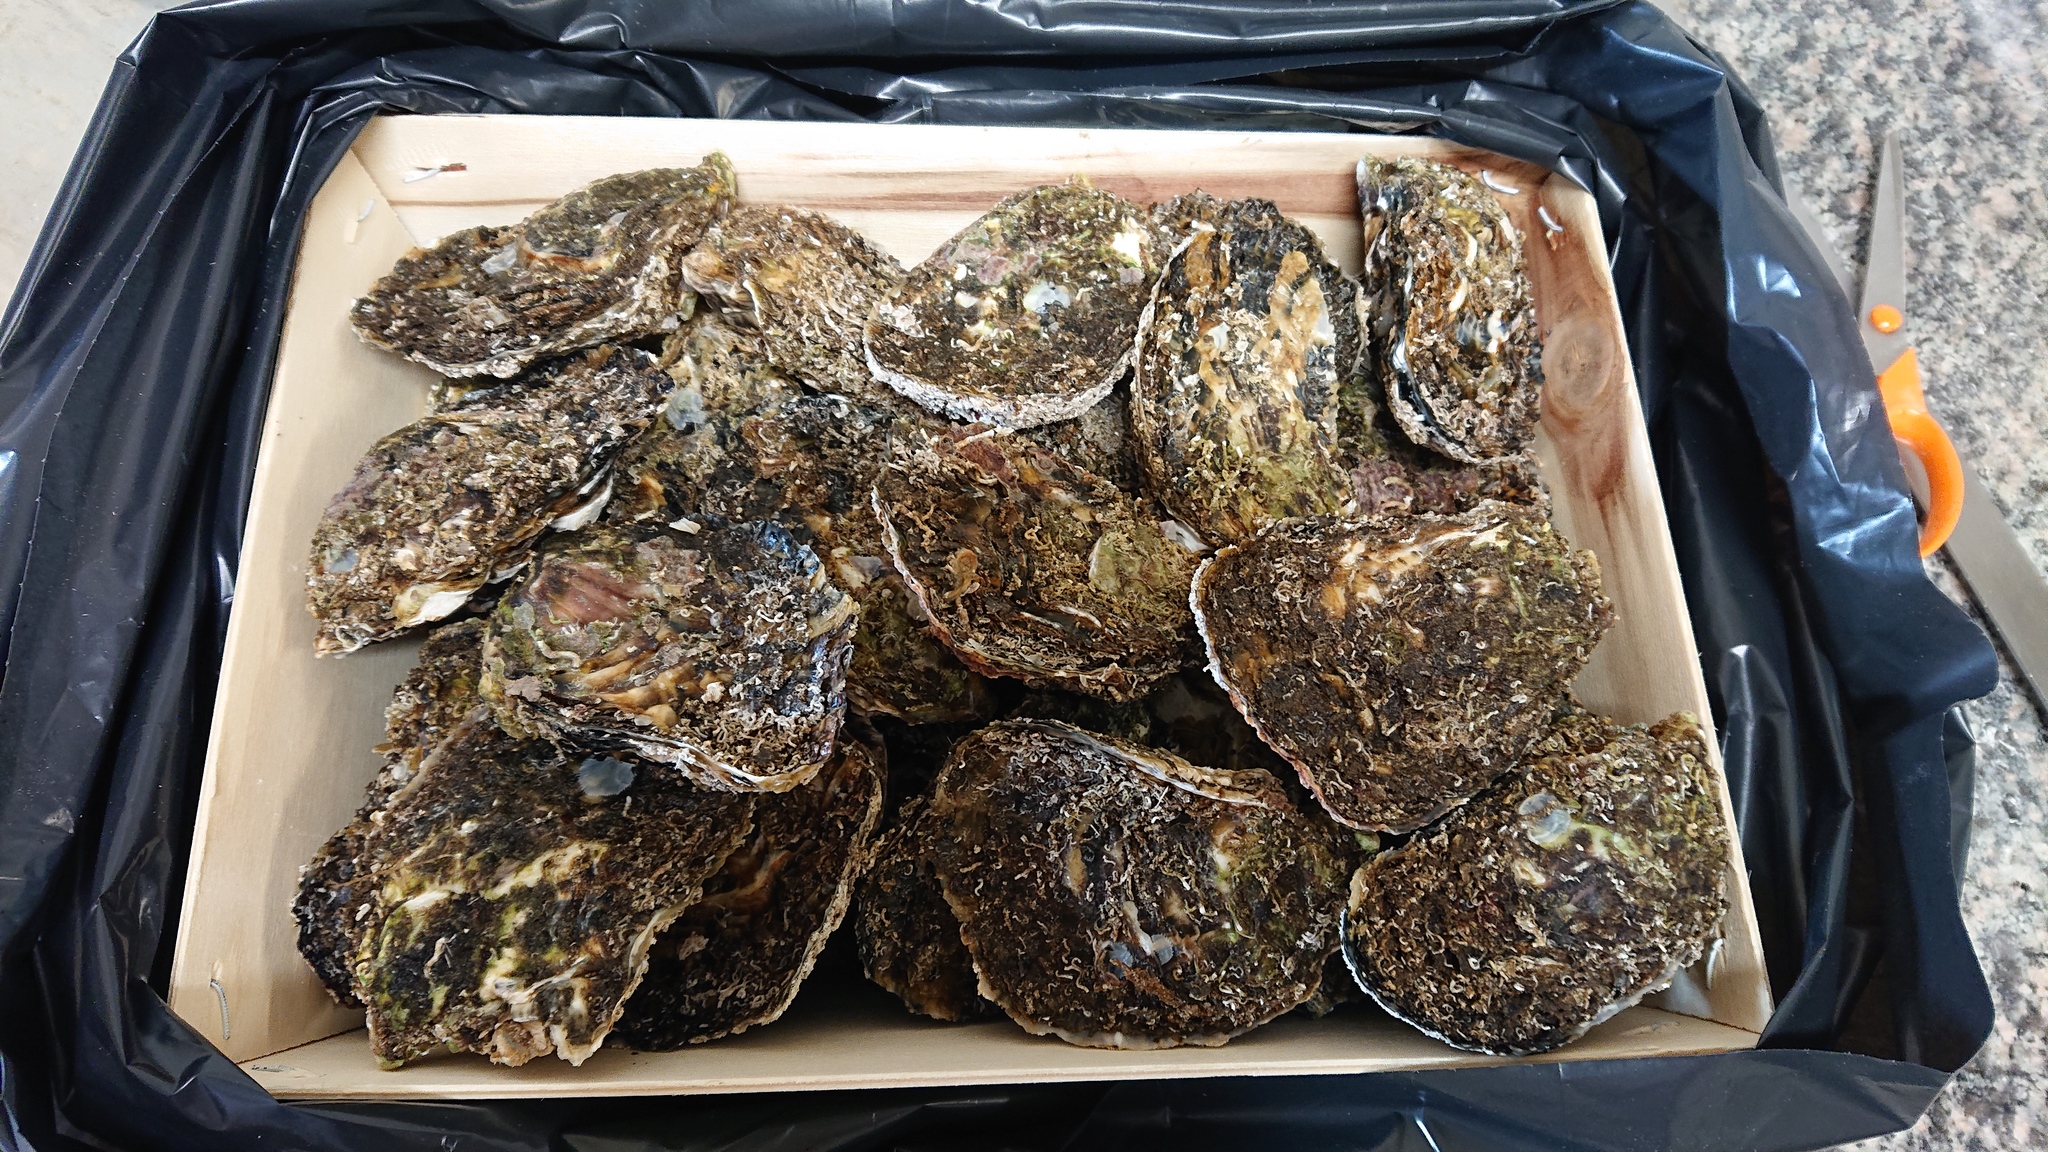 Ostriche di Corsica or Corsican oysters - Longpost, Snack, Cooking, Oysters, My